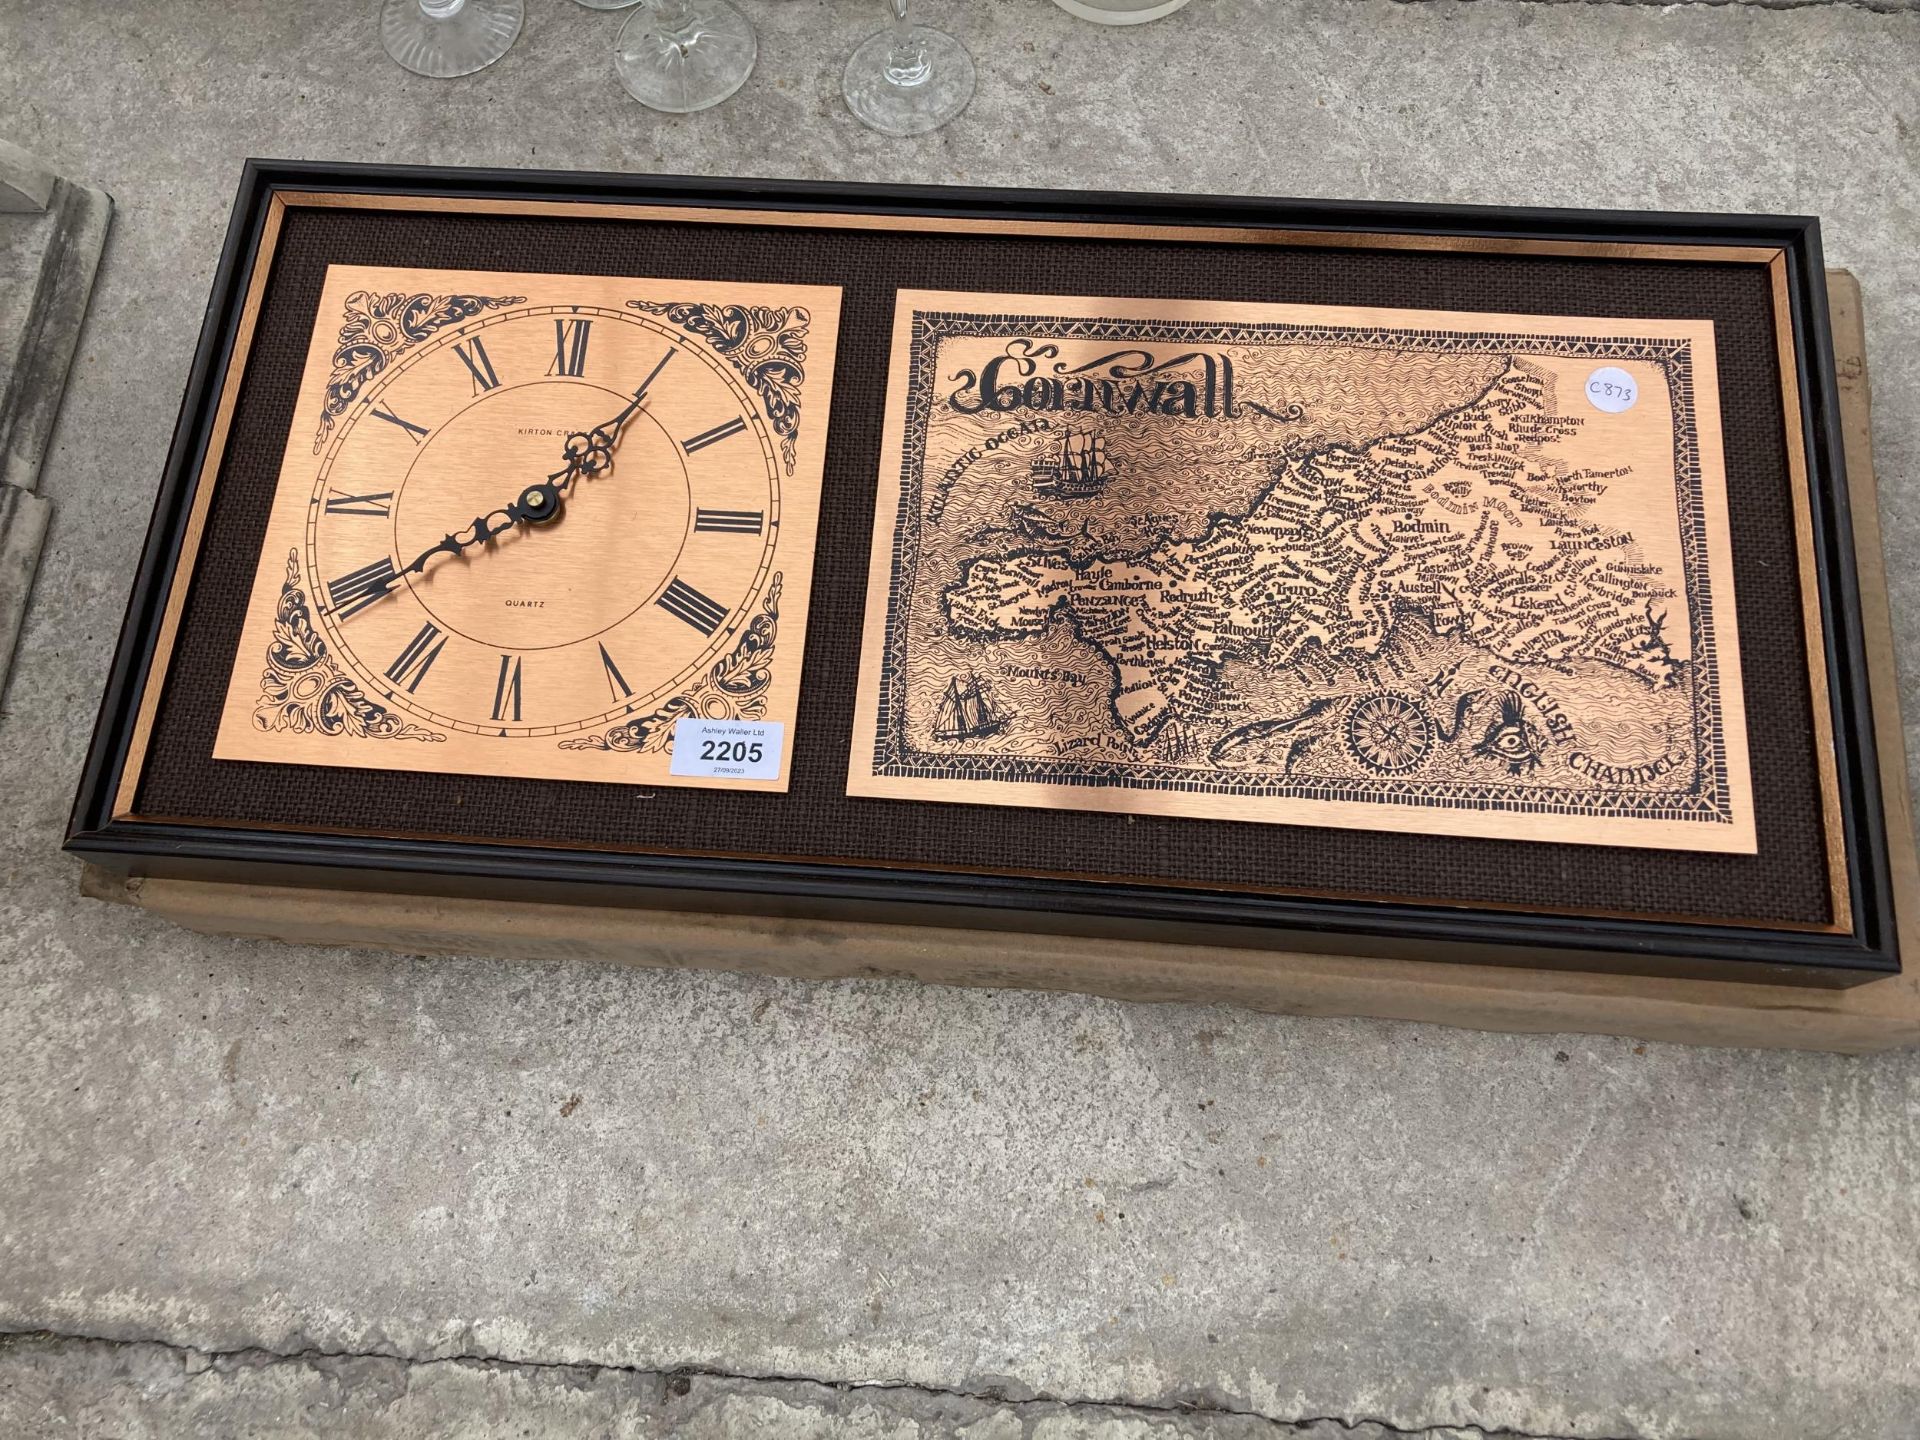 A FRAMED ETTCHED MAP OF CORNWALL AND A CLOCK